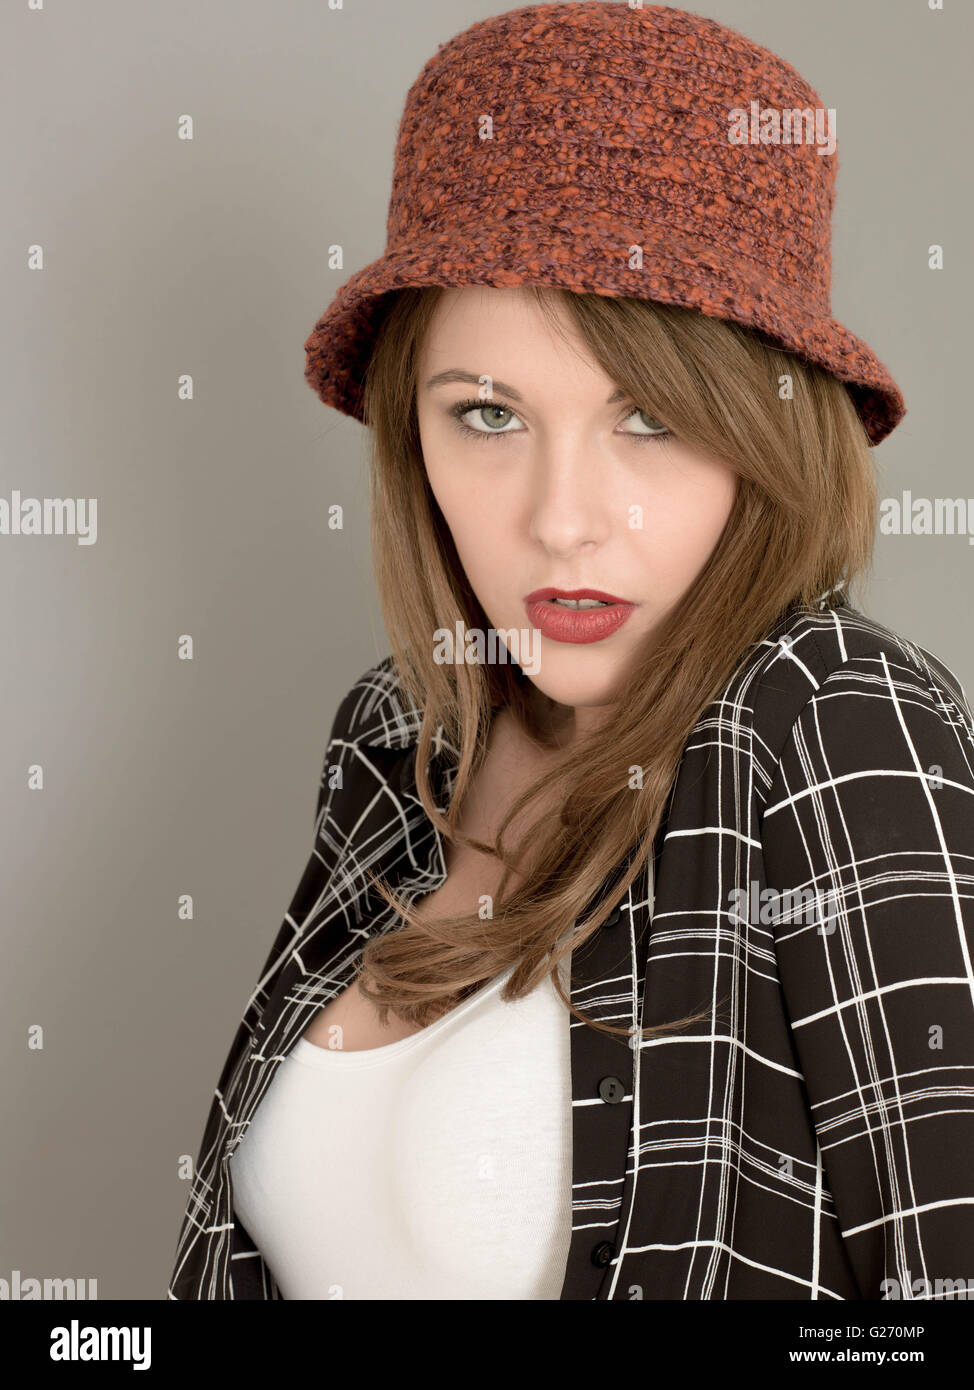 Portrait of a Sad Unhappy Woman Wearing a Red Woolen Hat and a Casual Checked Shirt Stock Photo